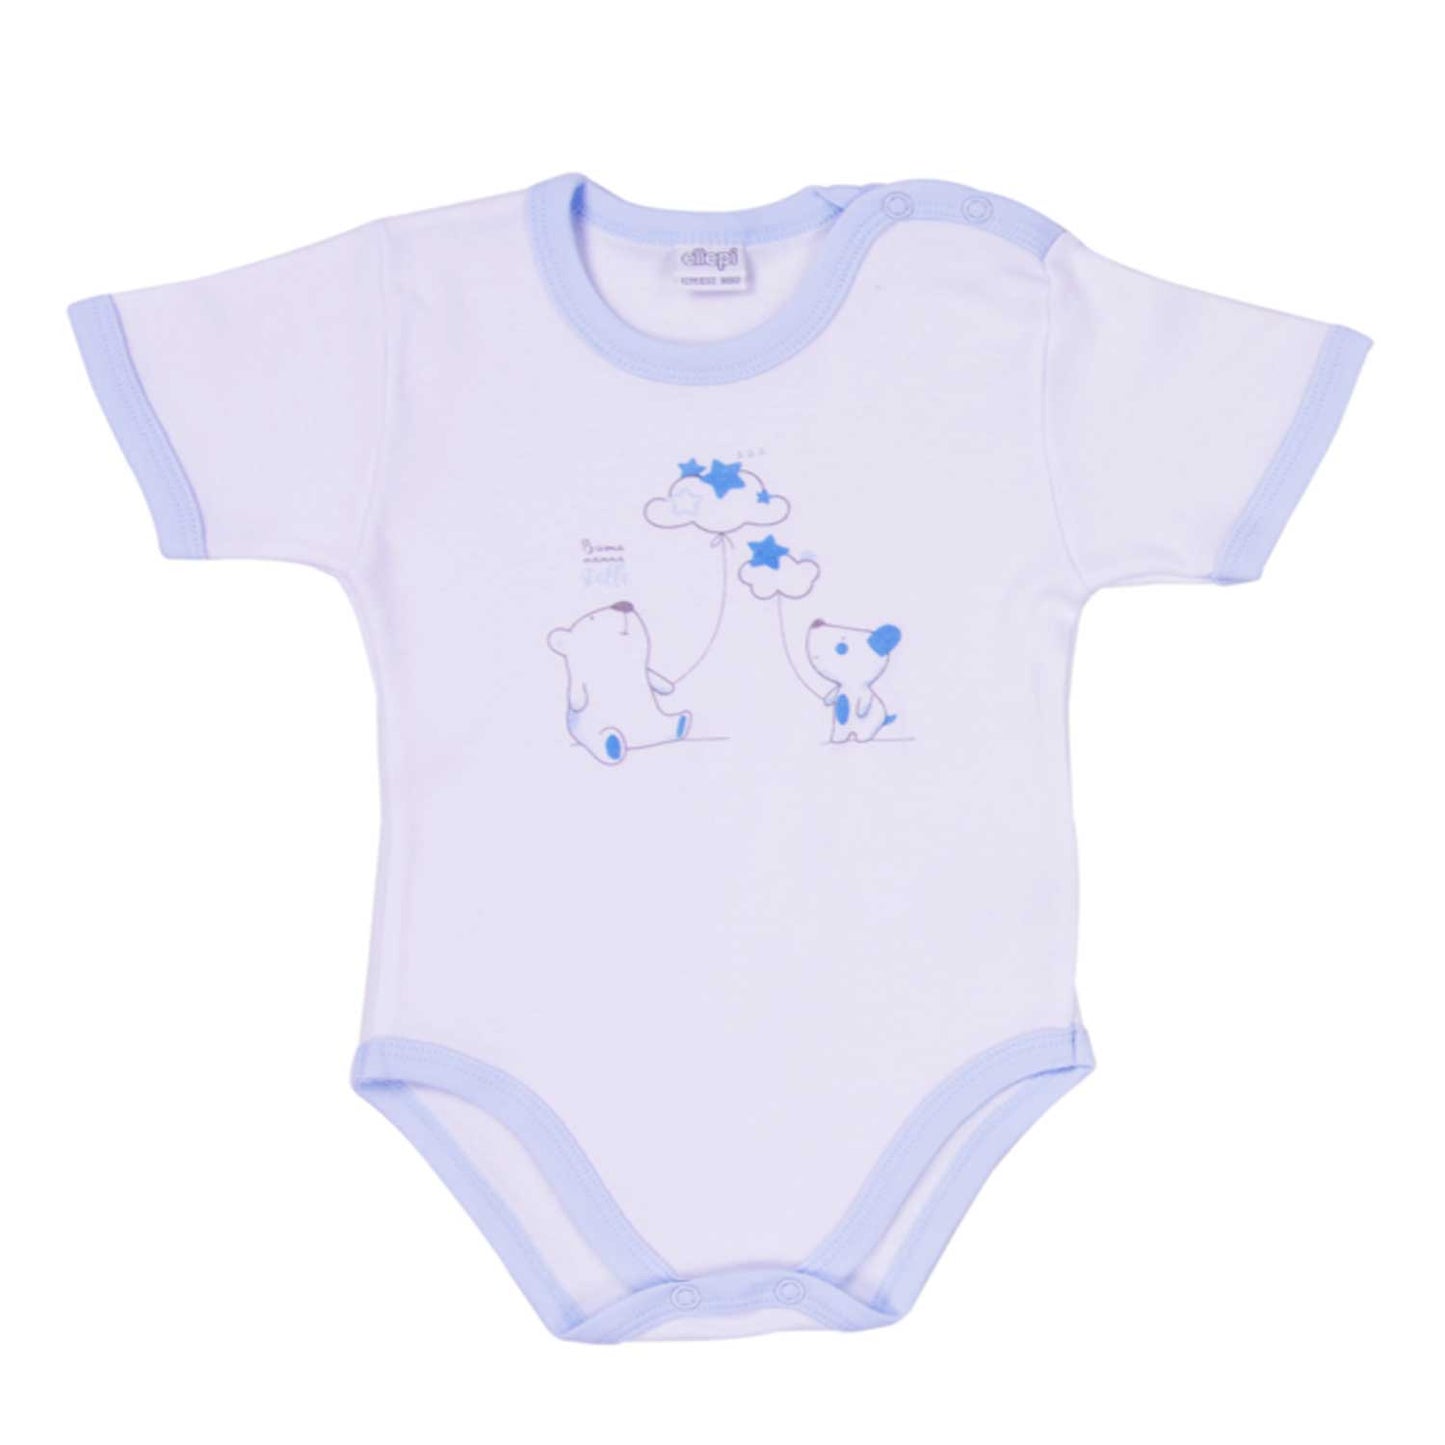 Ellepi - 2 Bodysuits with opening on the shoulder and short sleeves, 100% light blue cotton